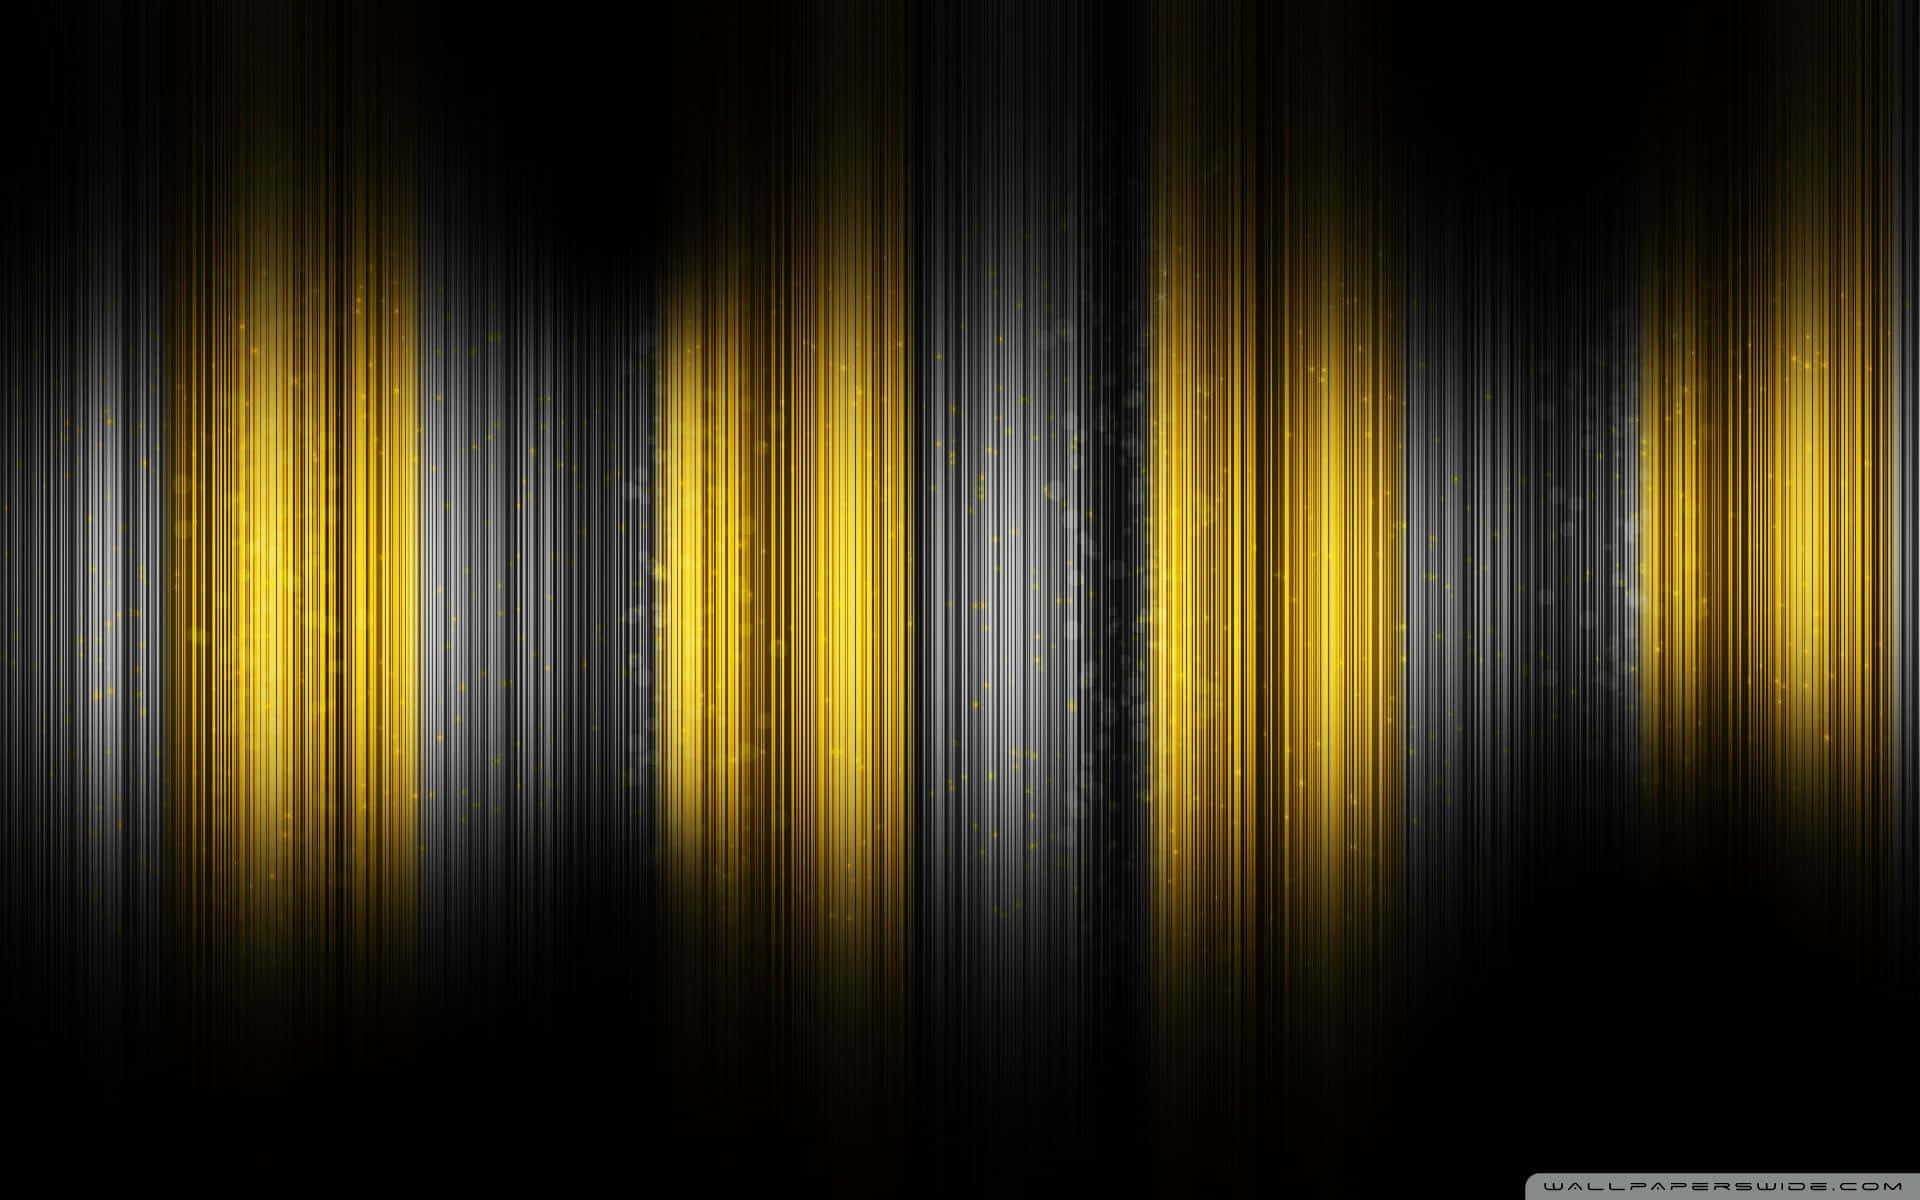 Download Vibrant Yellow Abstract Background Wallpaper | Wallpapers.com